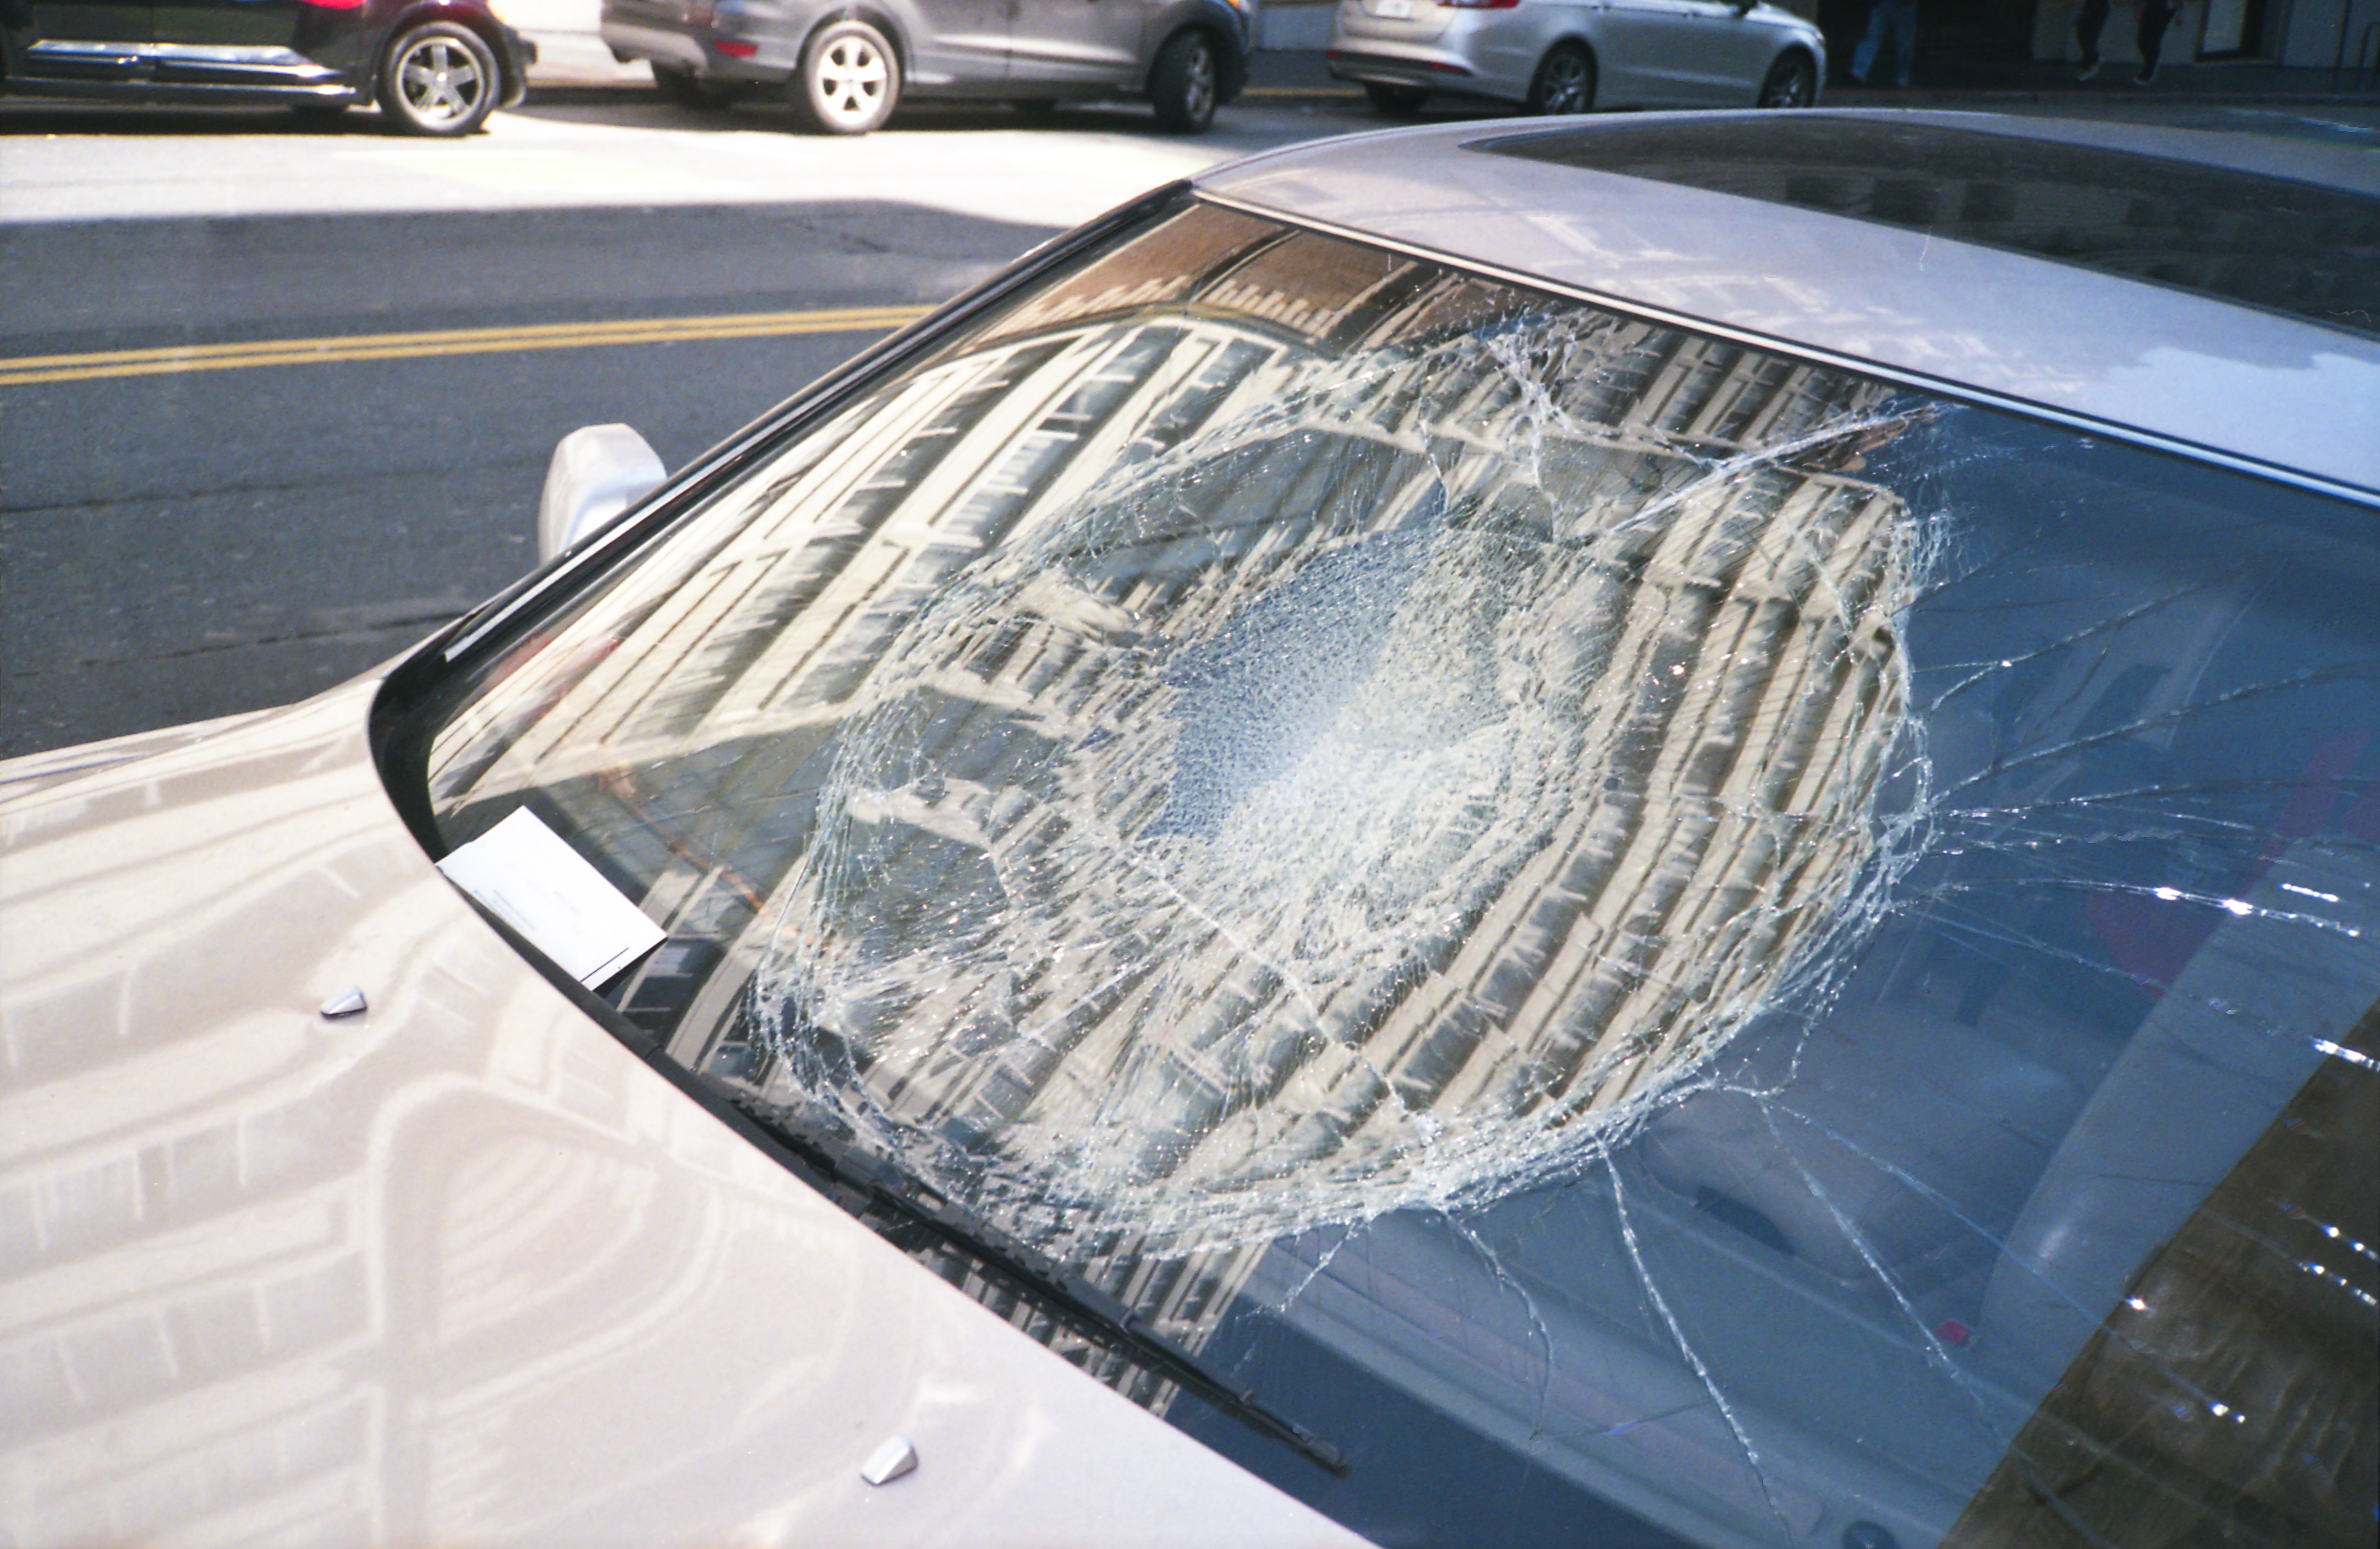 Smashed windshield on a car